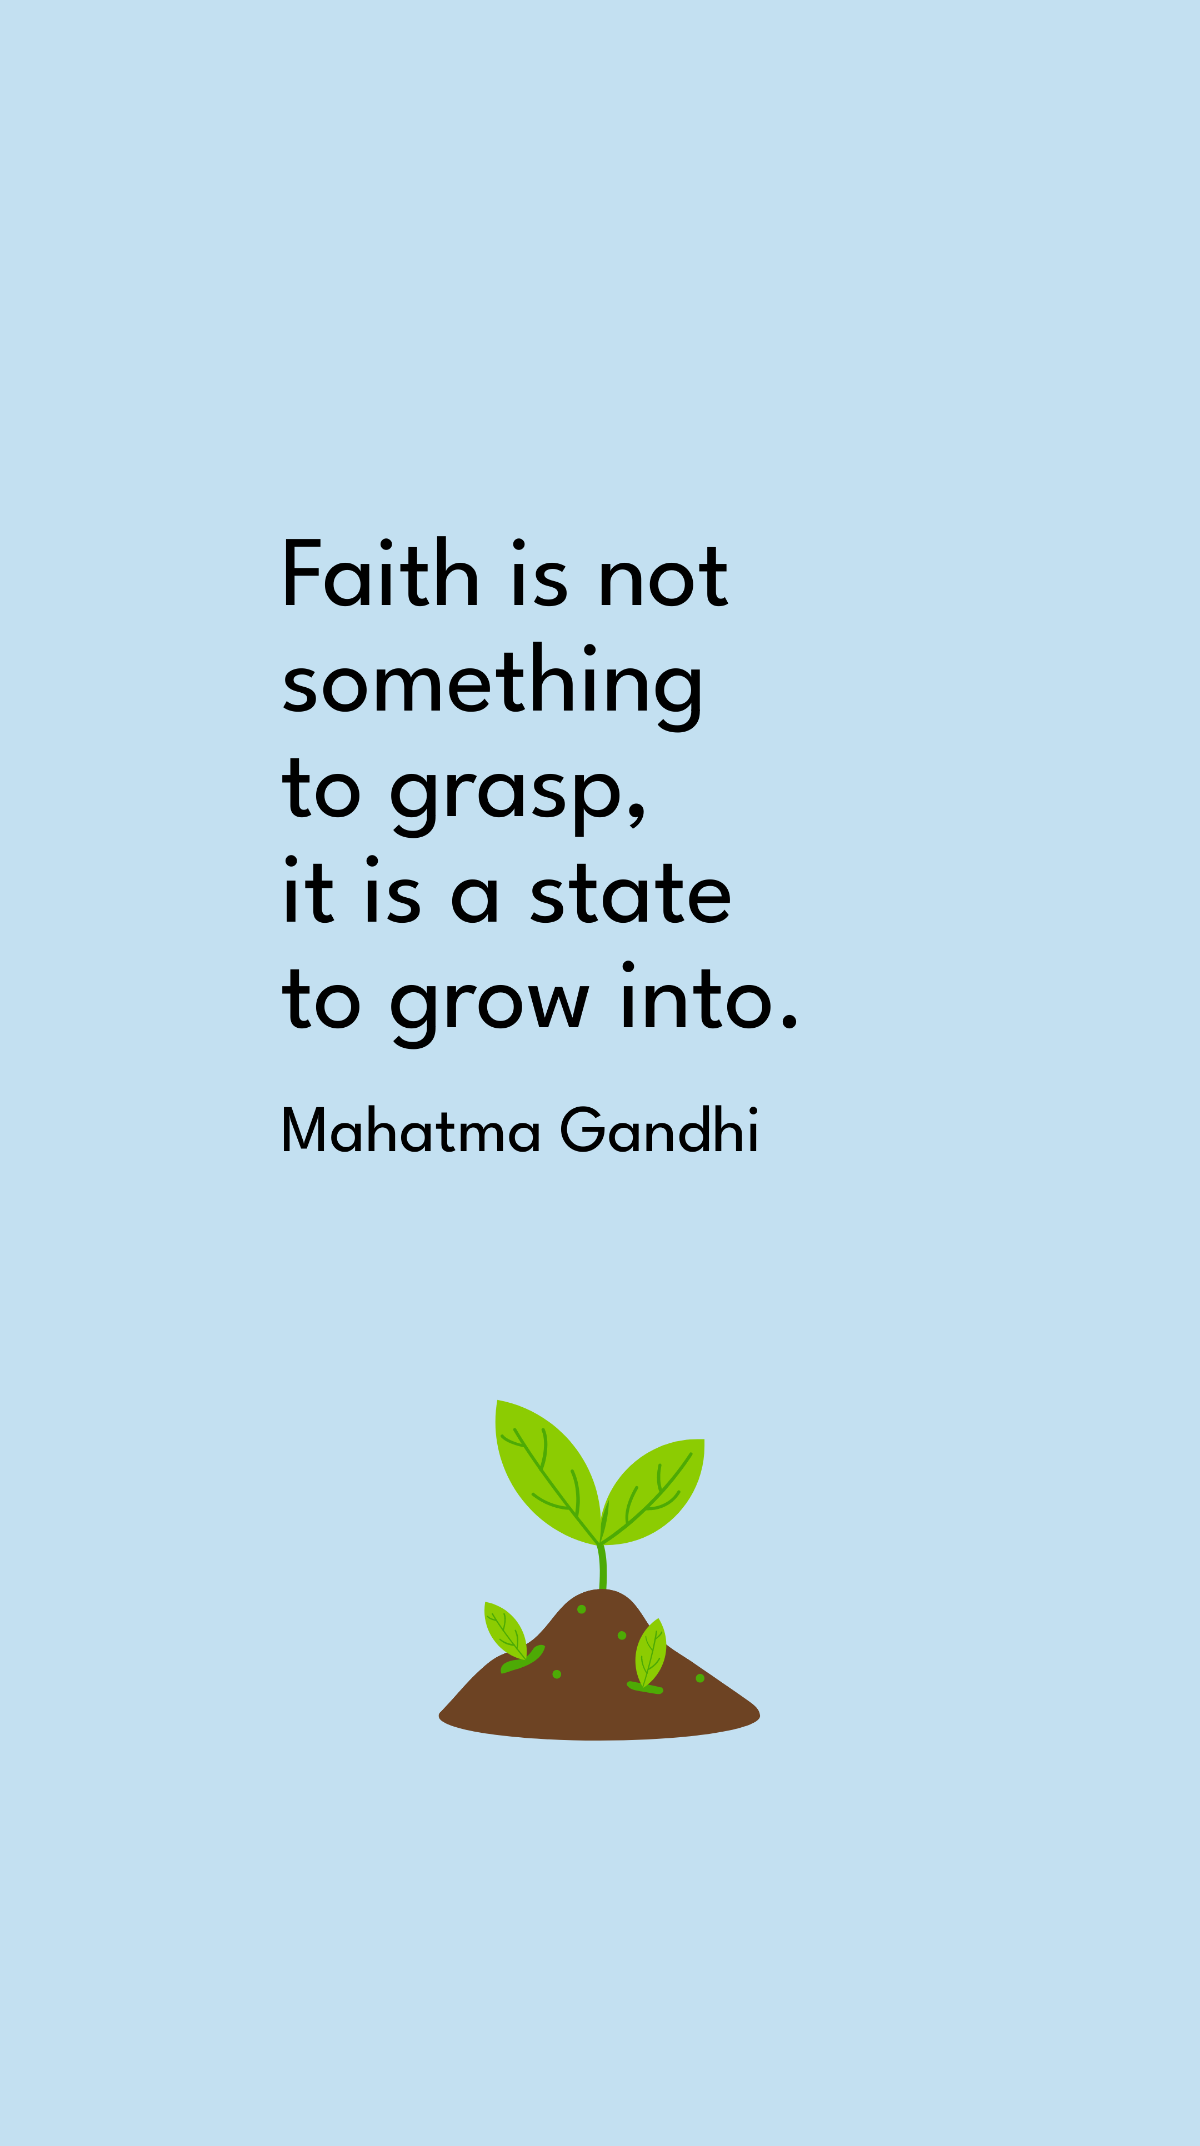 Mahatma Gandhi - Faith is not something to grasp, it is a state to grow into. Template